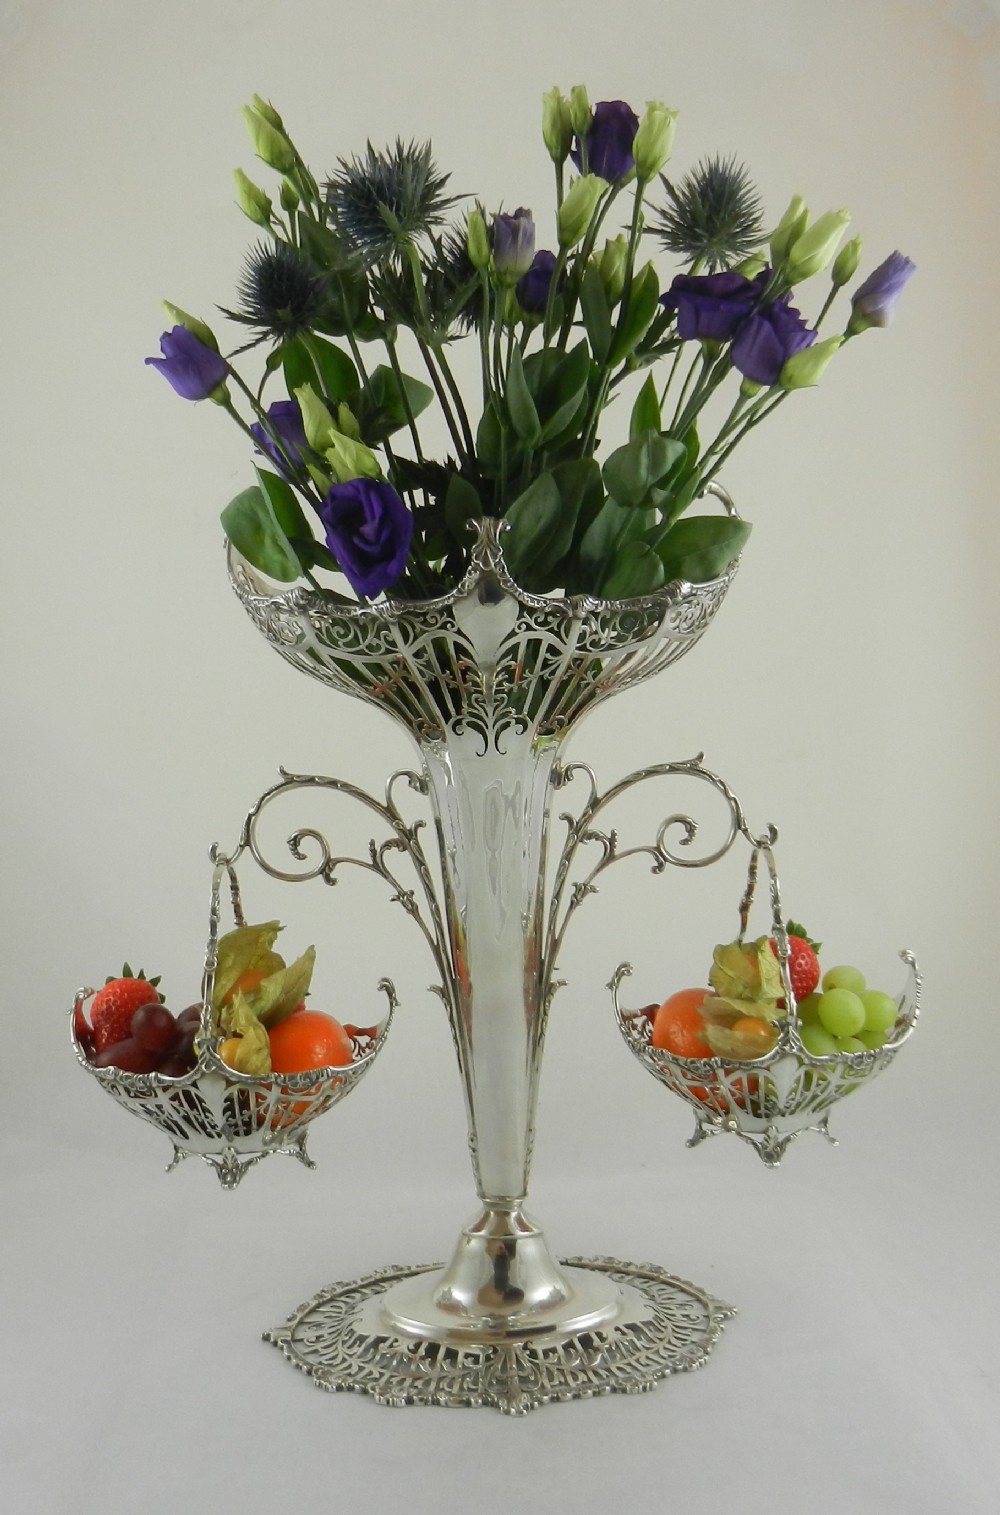 antique silver epergne